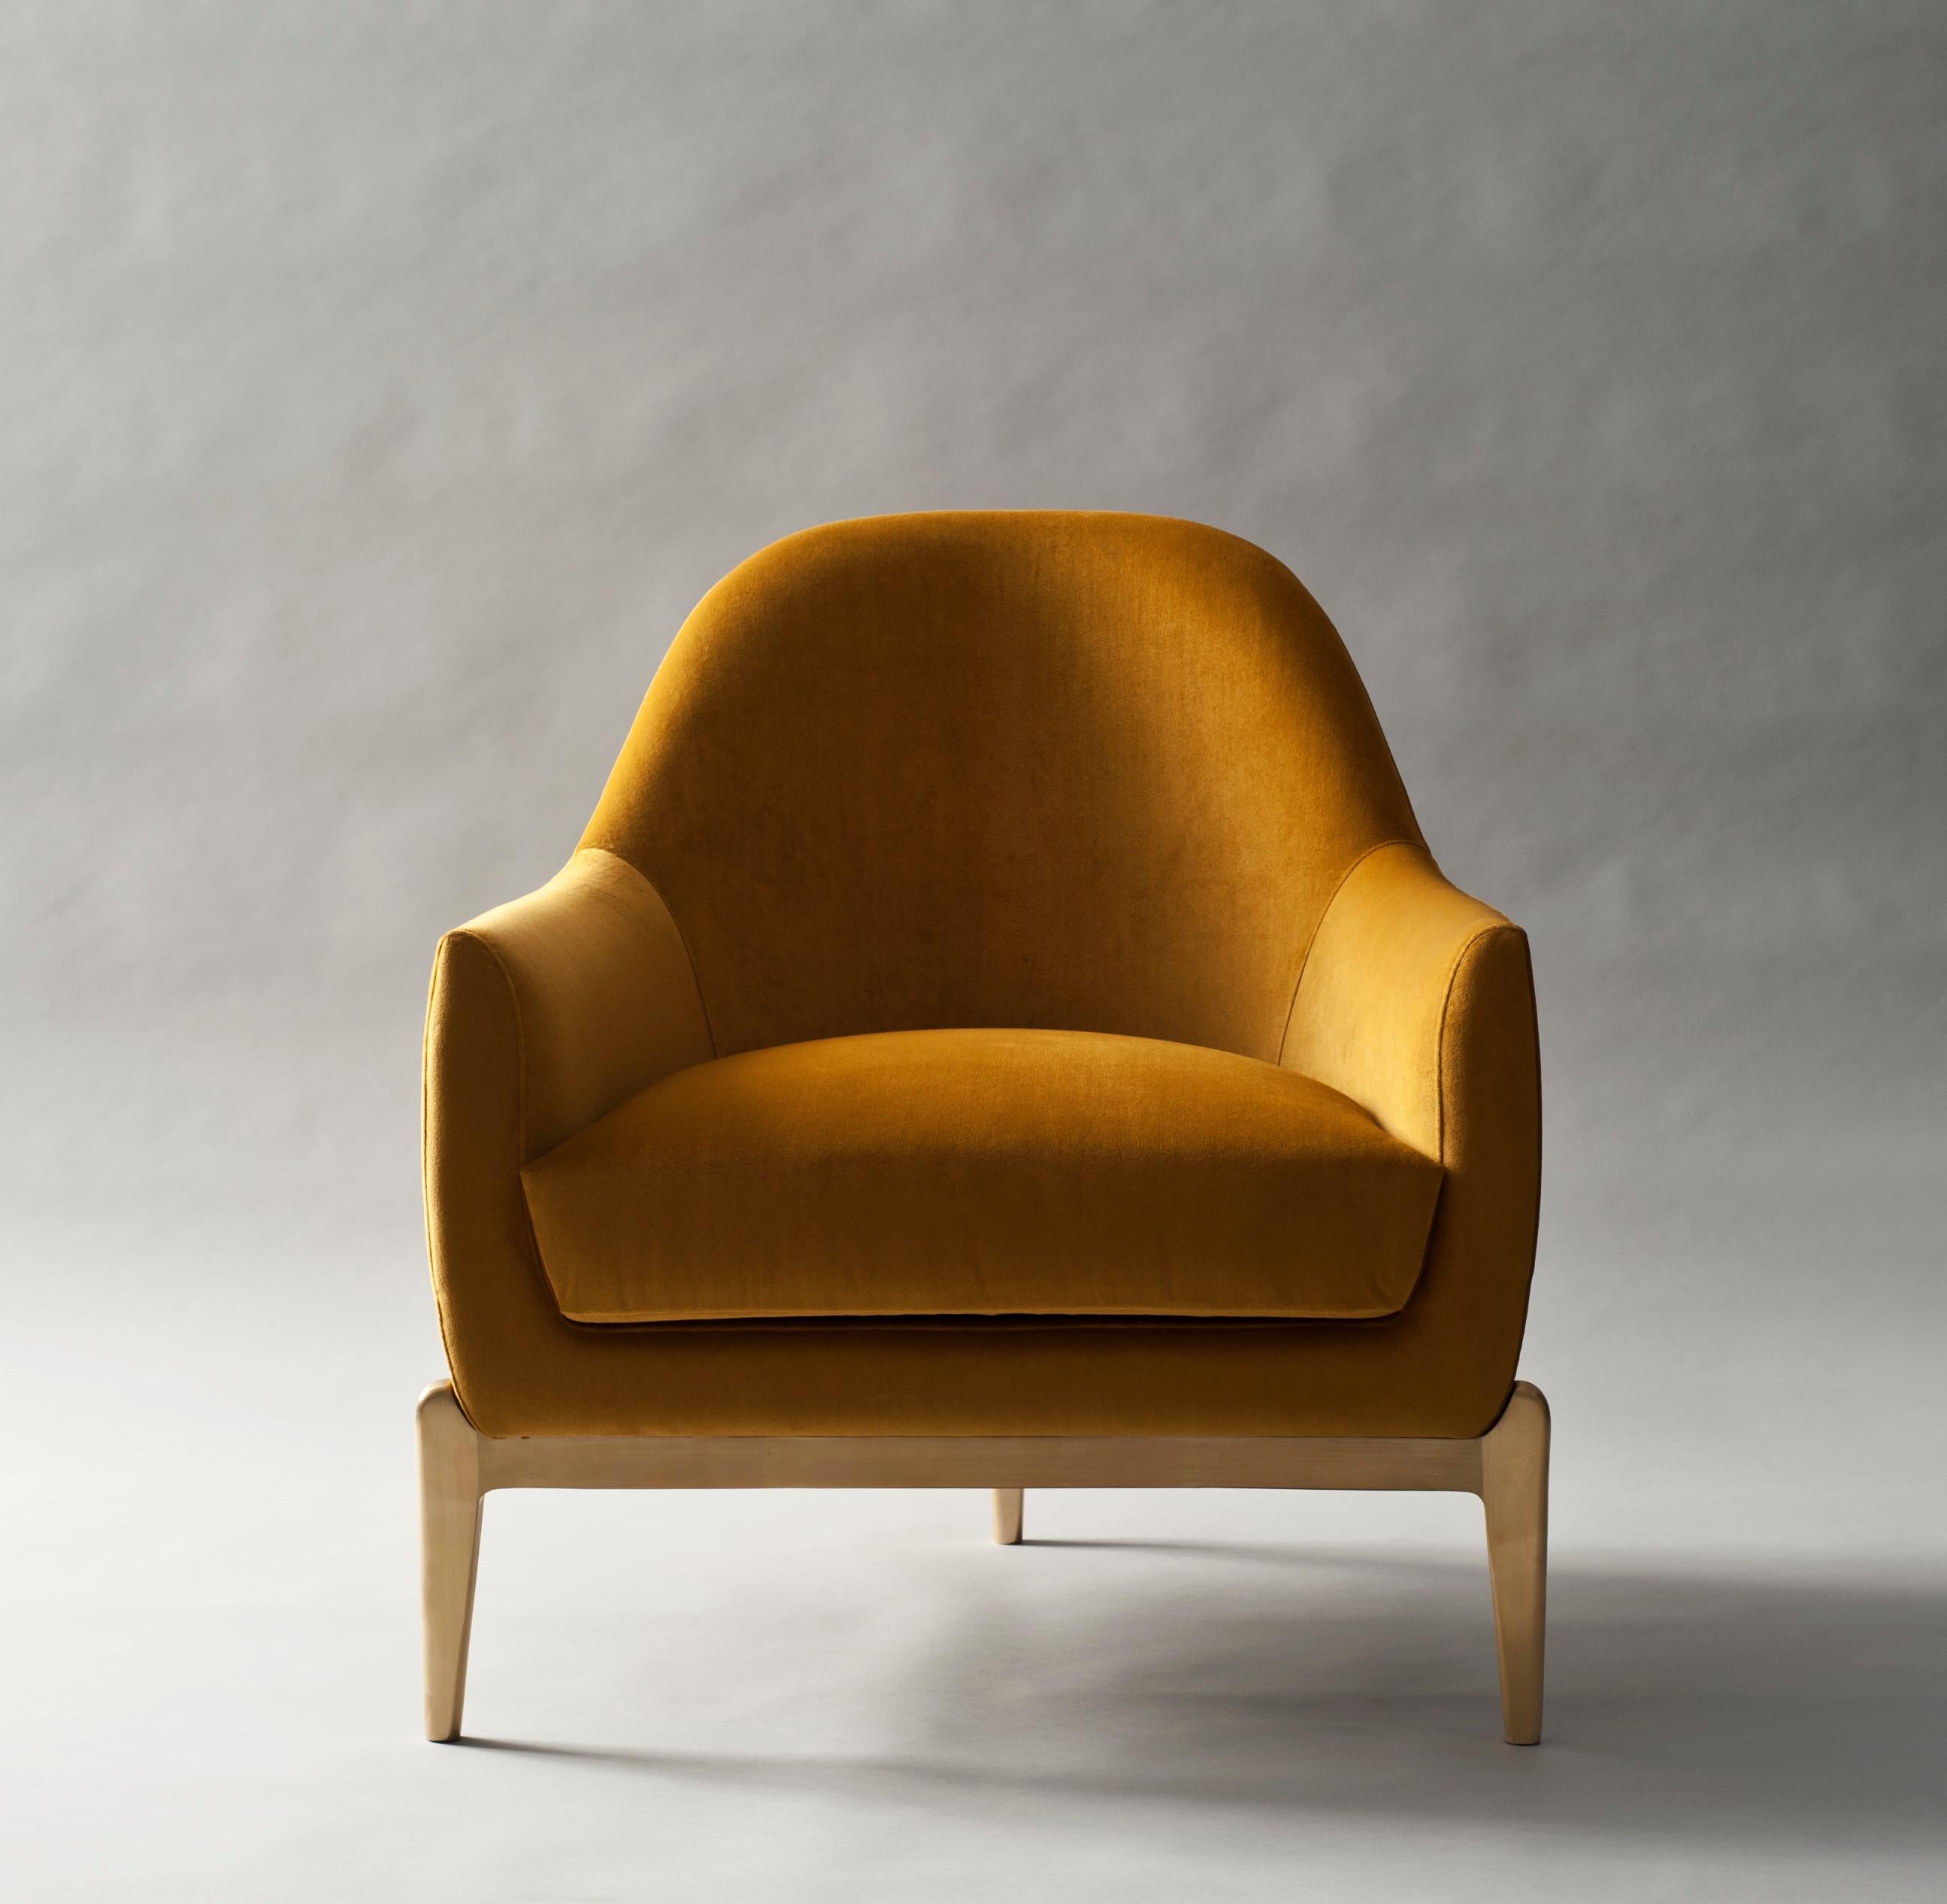 The Treble side or armchair by DeMuro Das has a curved profile supported by a hand-cast, three-legged base in solid satin bronze. A solid hardwood frame with European webbing and multi-density foam gives this piece solidity and strength. The chair